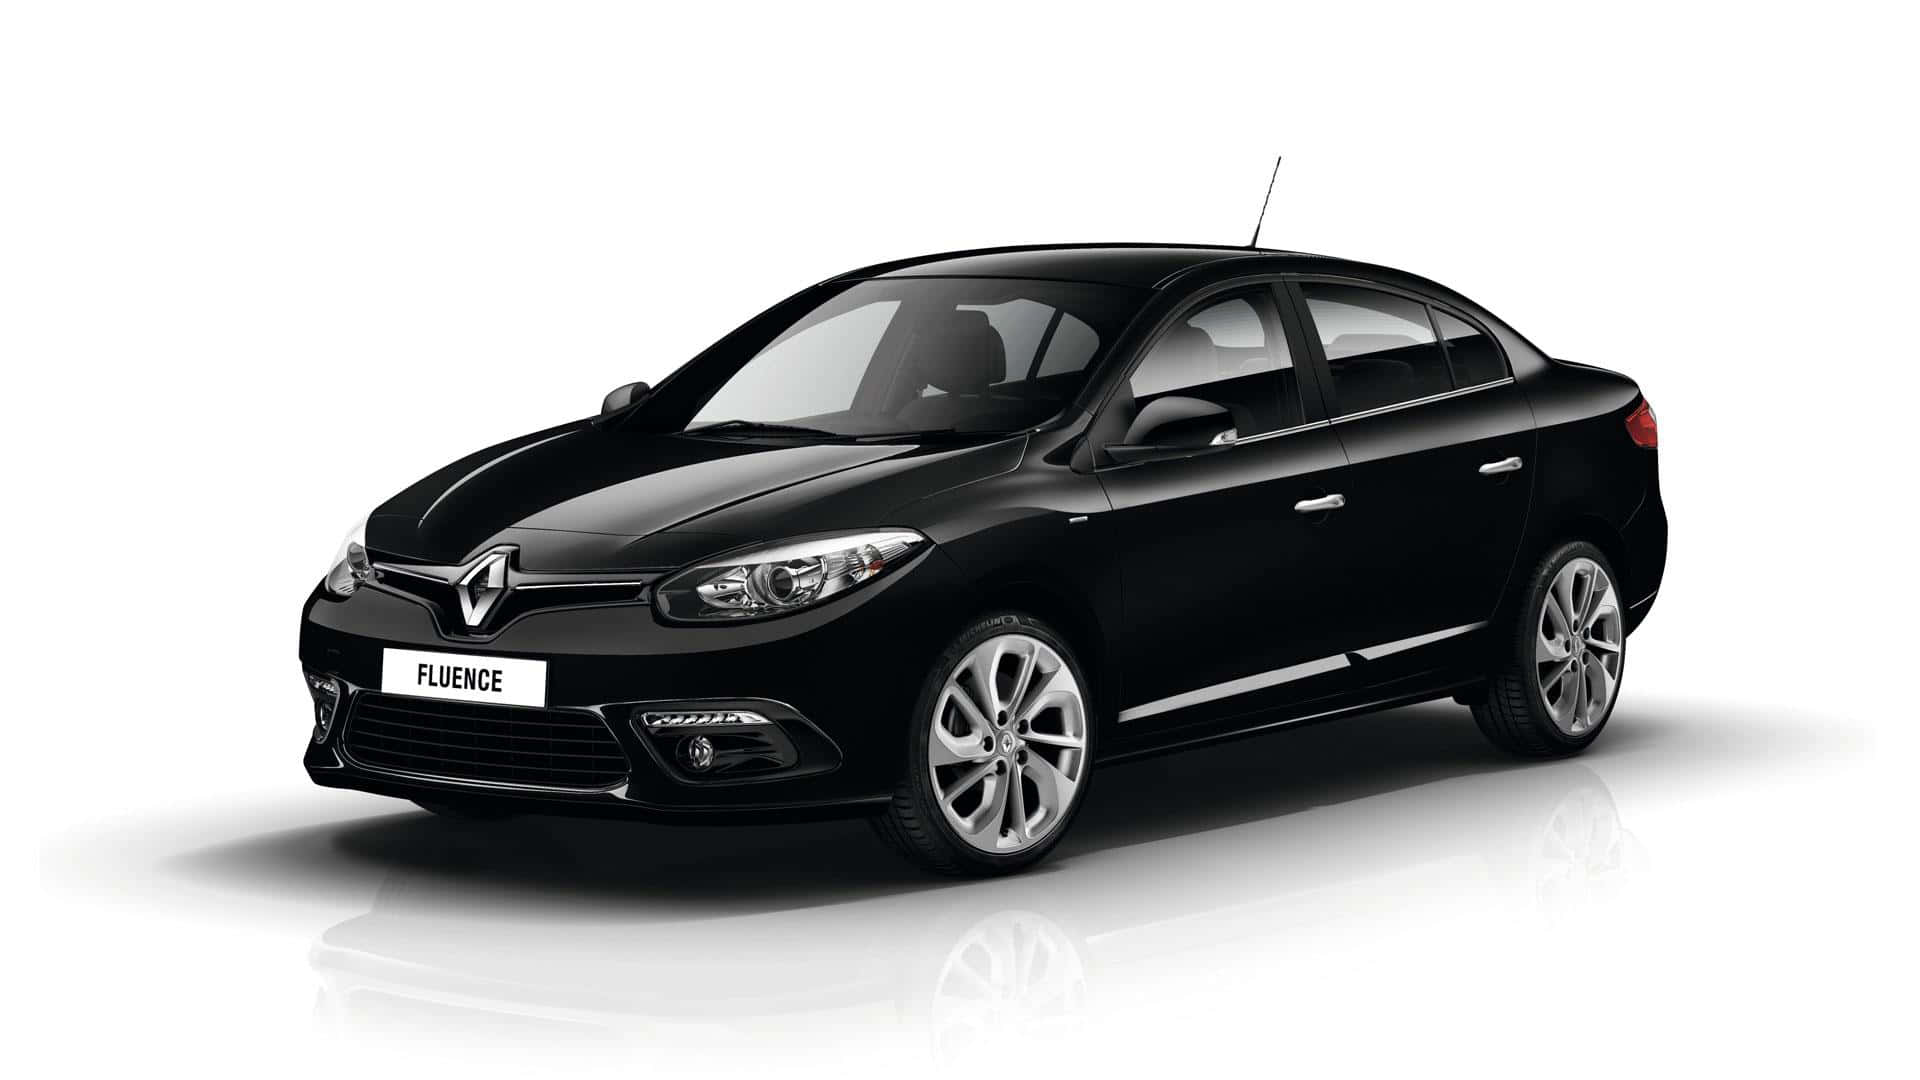 Sleek and Stylish Renault Fluence in Action Wallpaper